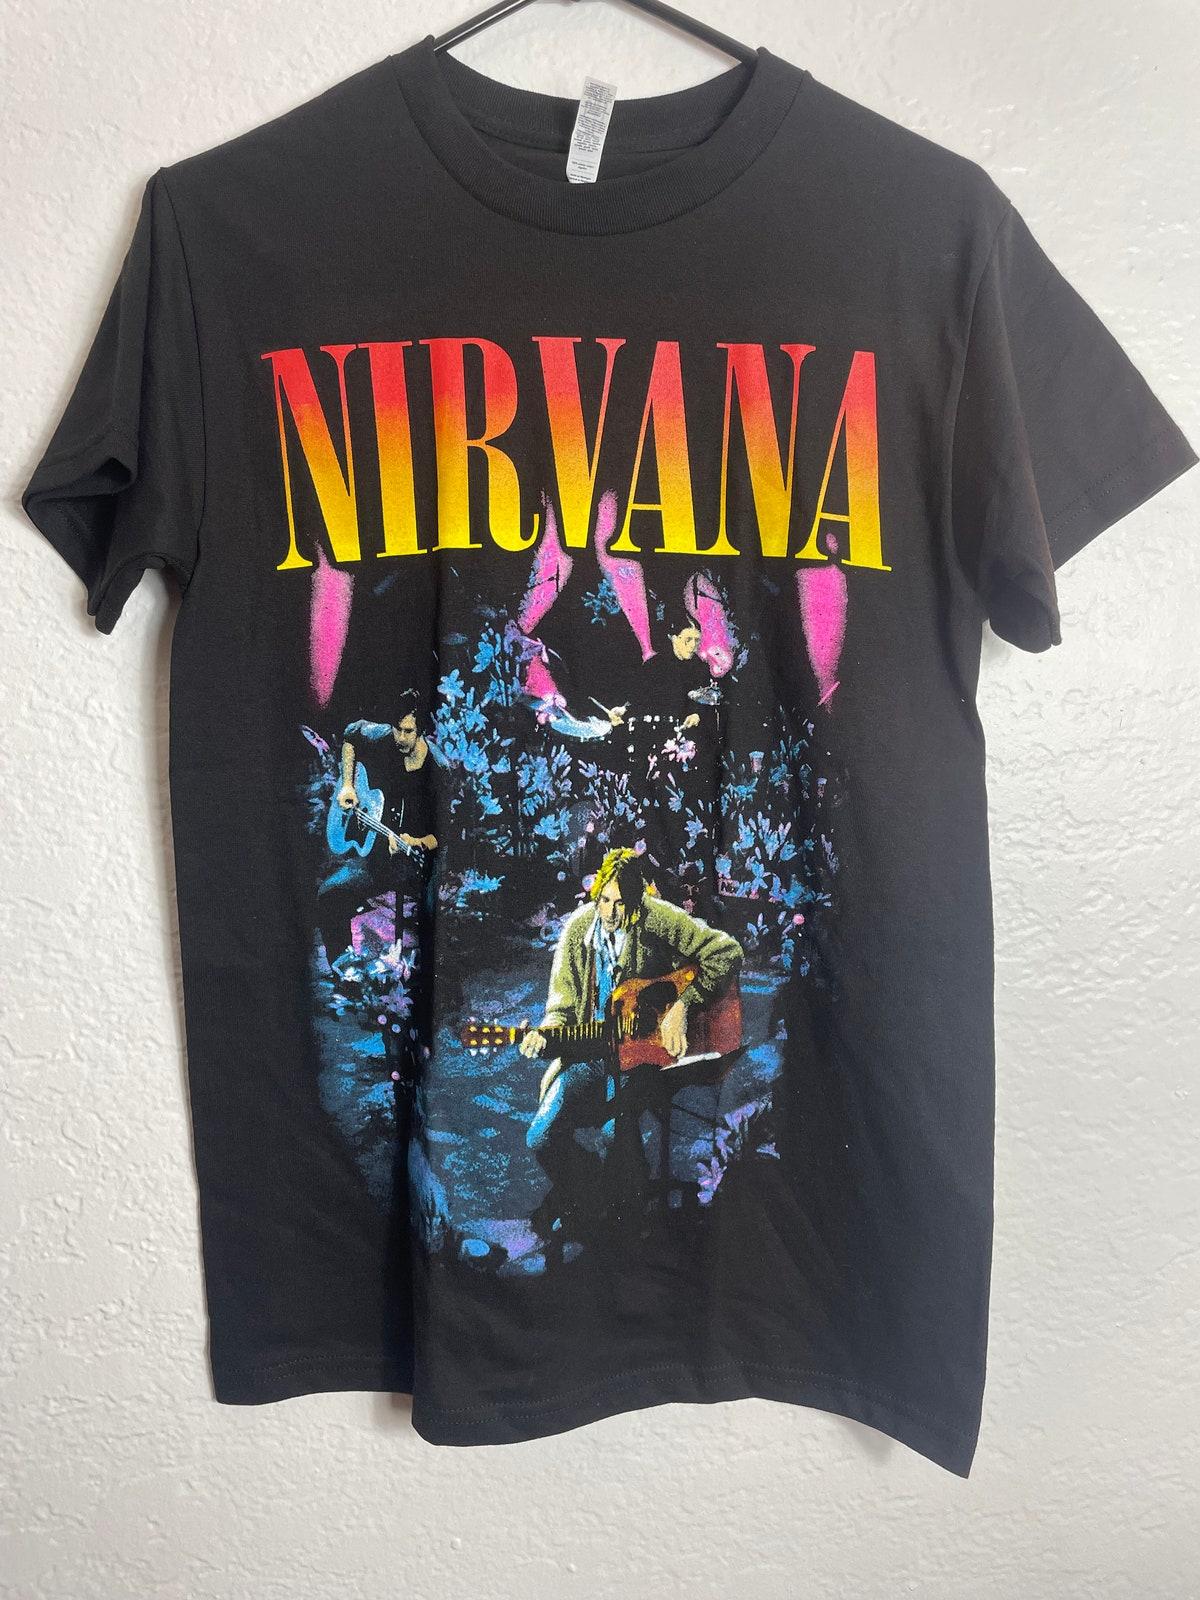 Nirvana Live At The Paramount October 31 1991 Croptop Shirt Gift For Fans